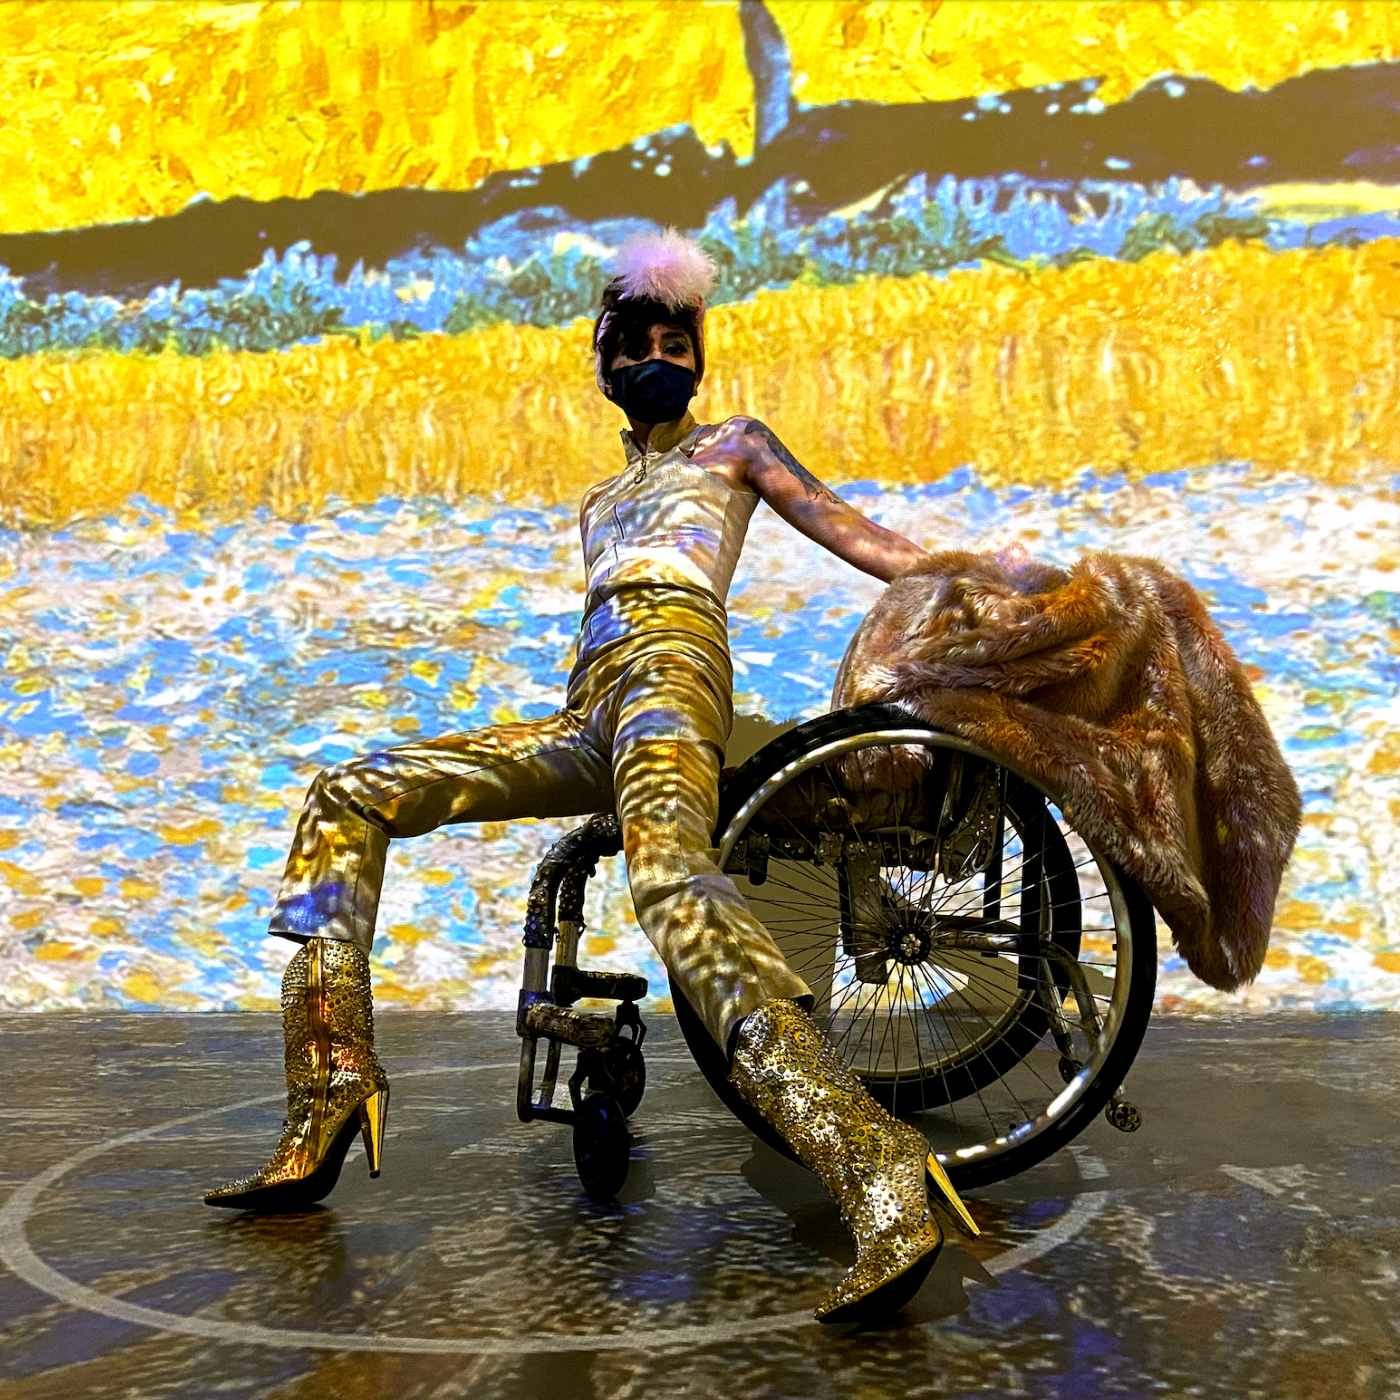 Pansy St. Battie is on stage wearing gold-toned clothing, holding on to a wheelchair.